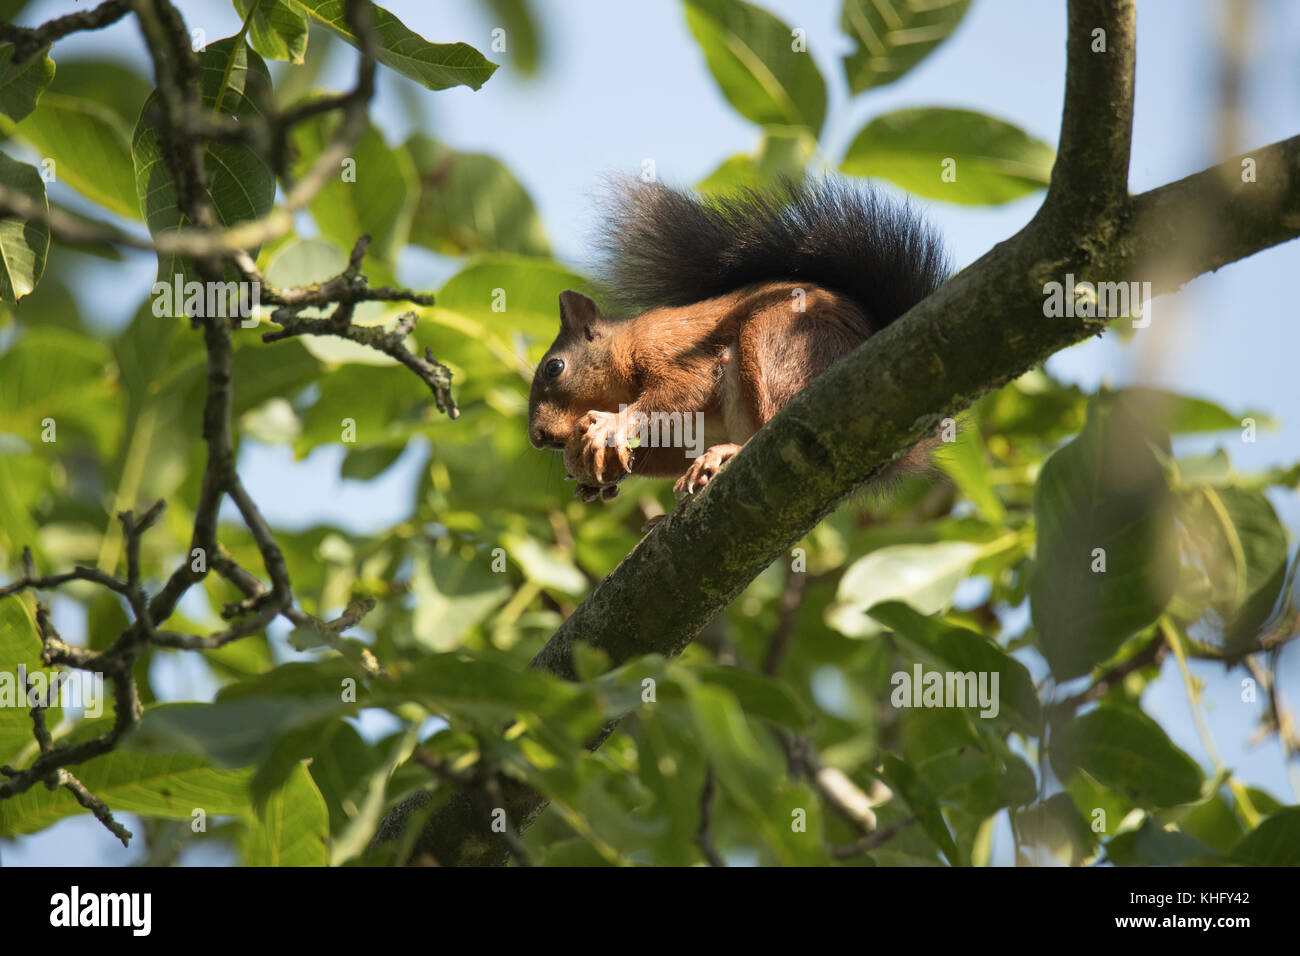 Squirrel sitting high in a tree and eating a nut Stock Photo